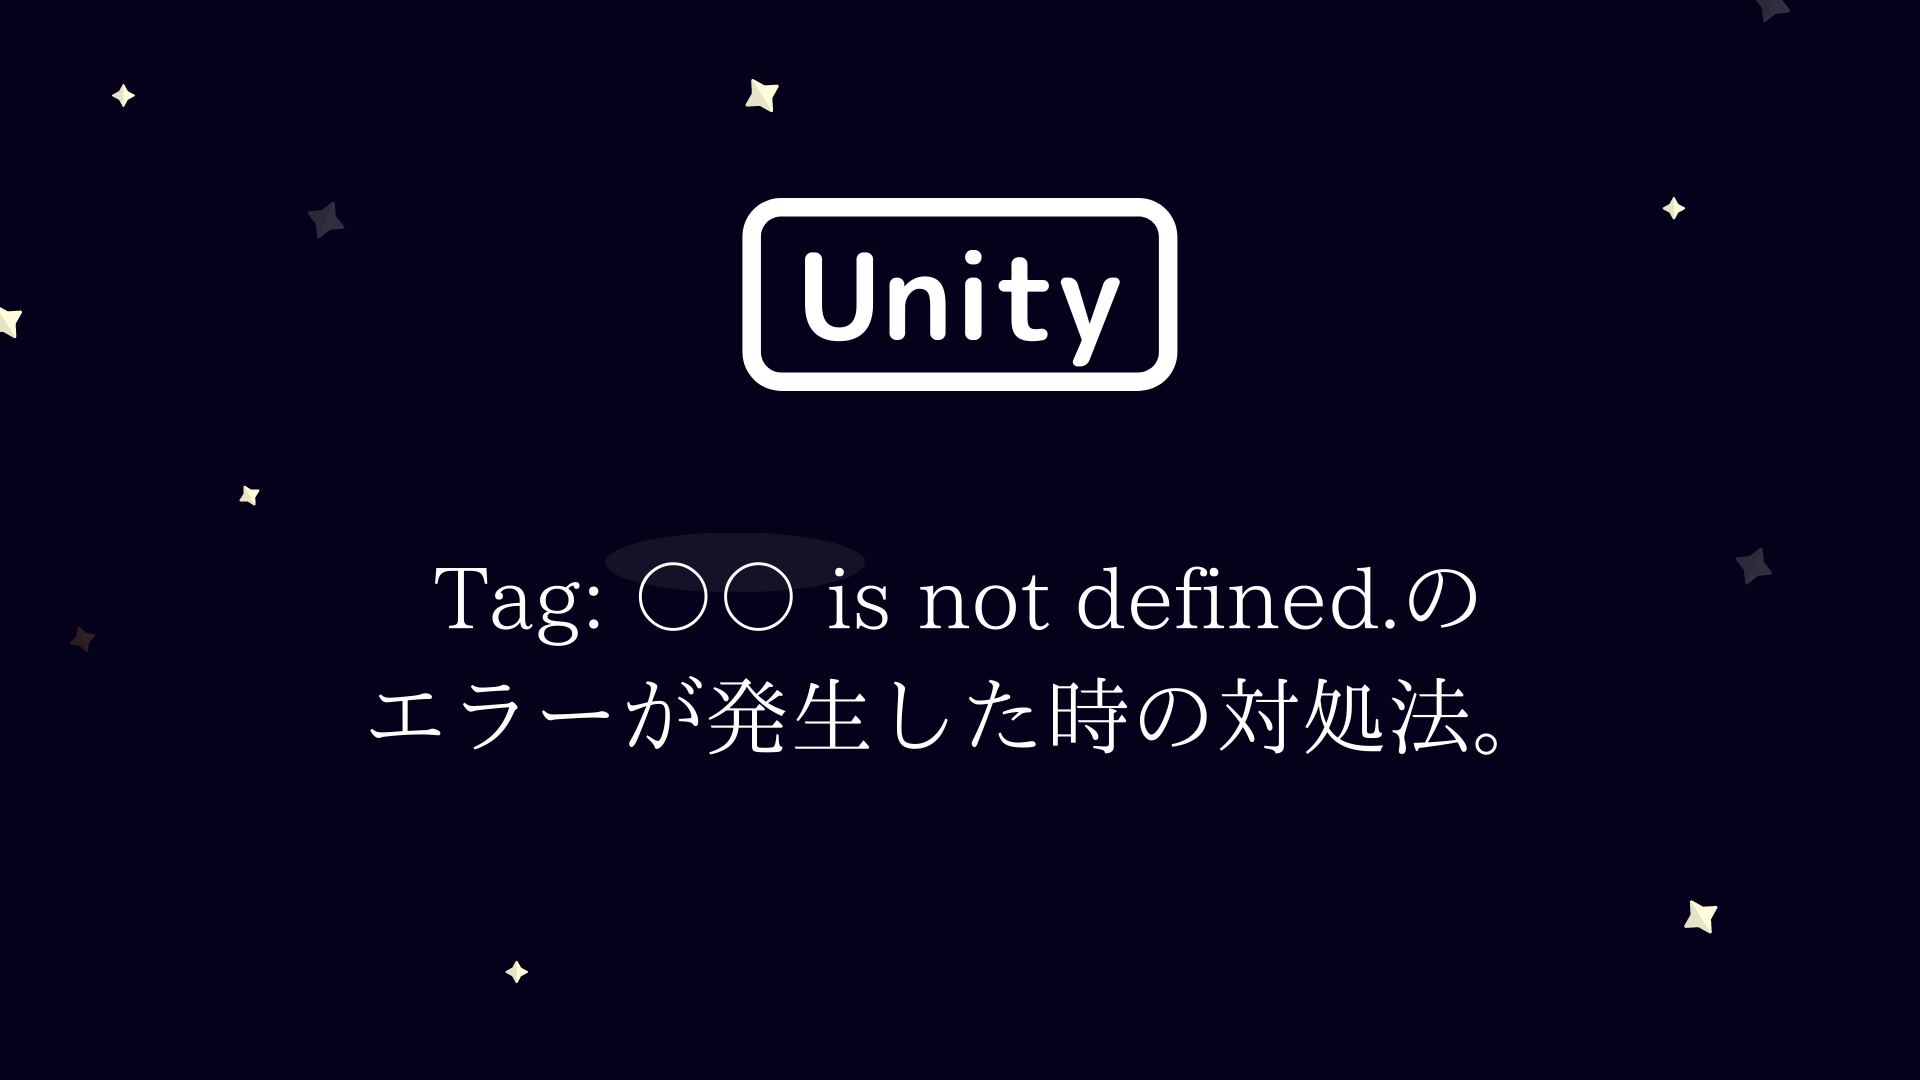 Tag: 〇〇 is not defined.のエラーが発生した時の対処法。